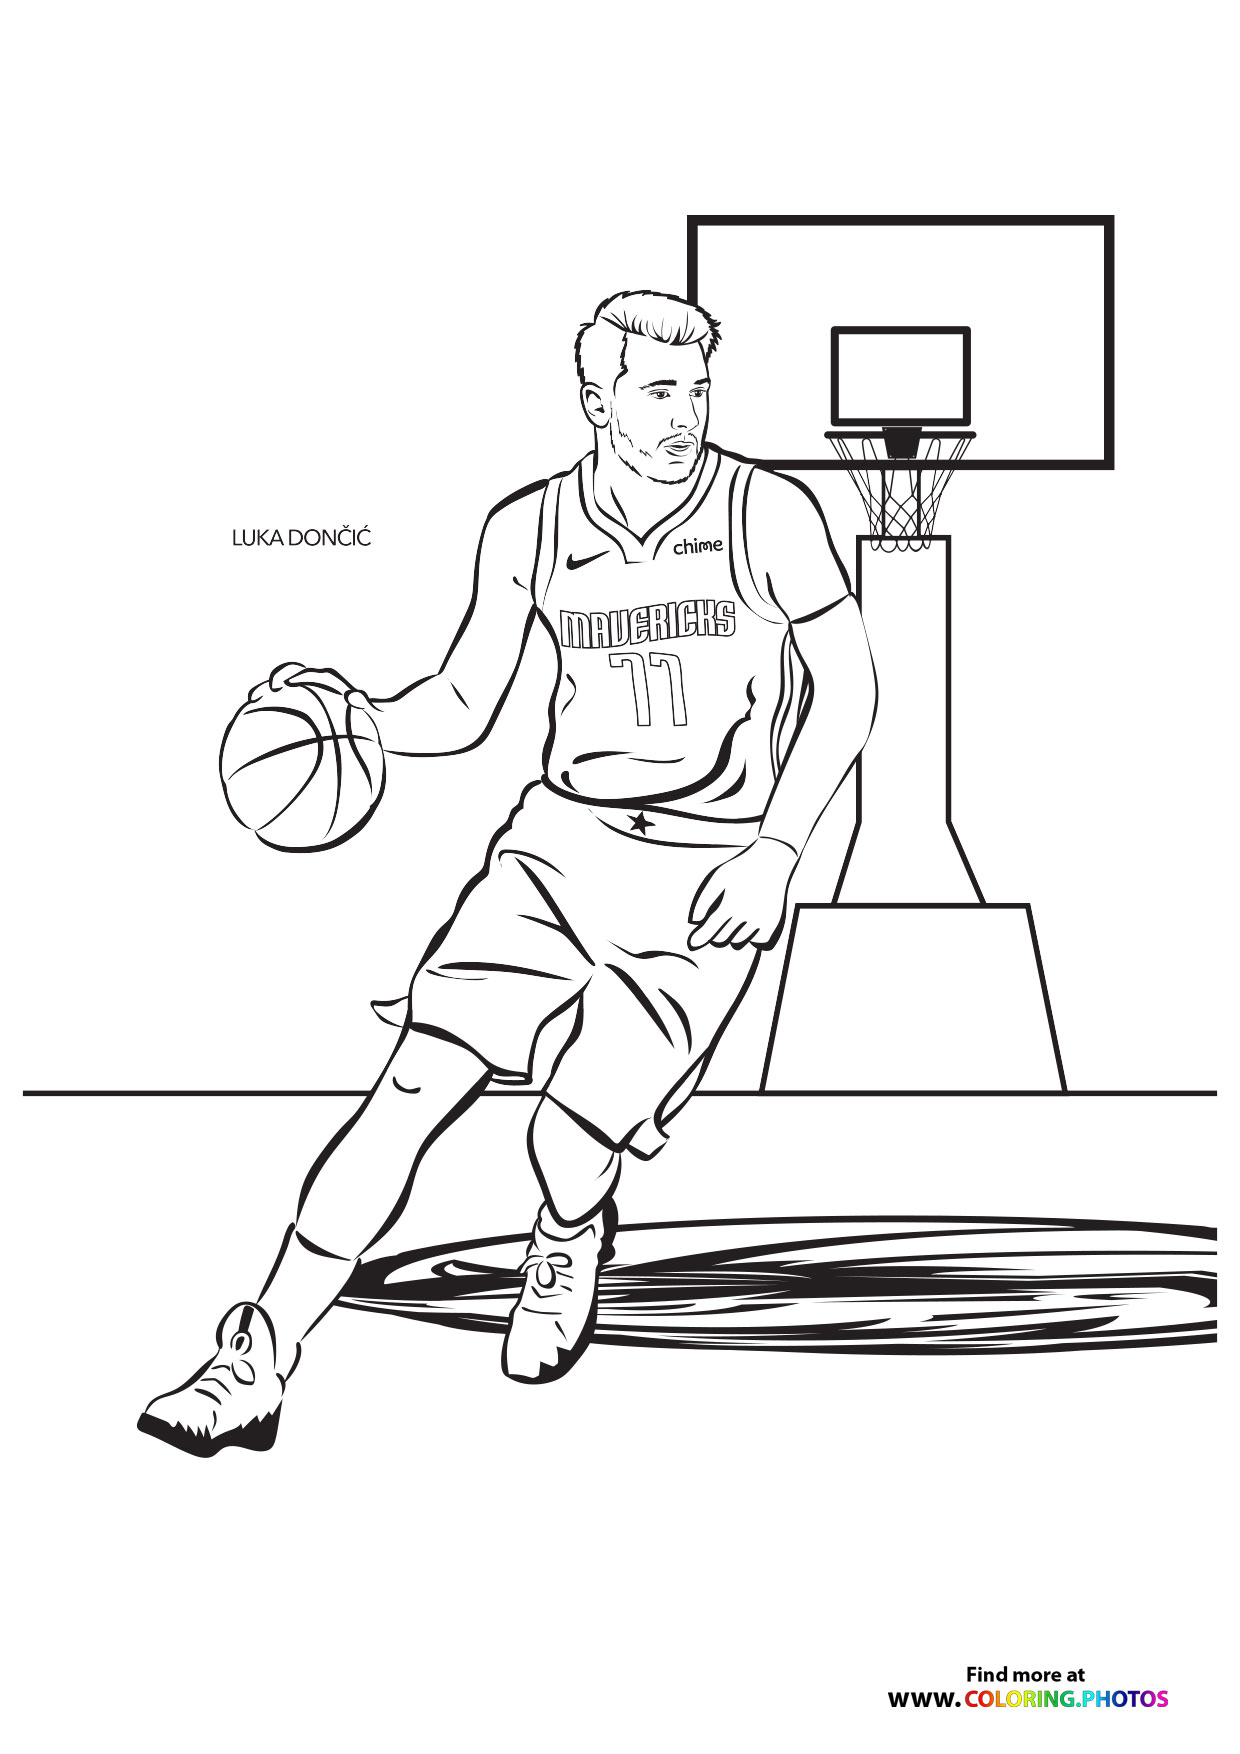 Sports - Coloring Pages for kids | Free and easy print or download